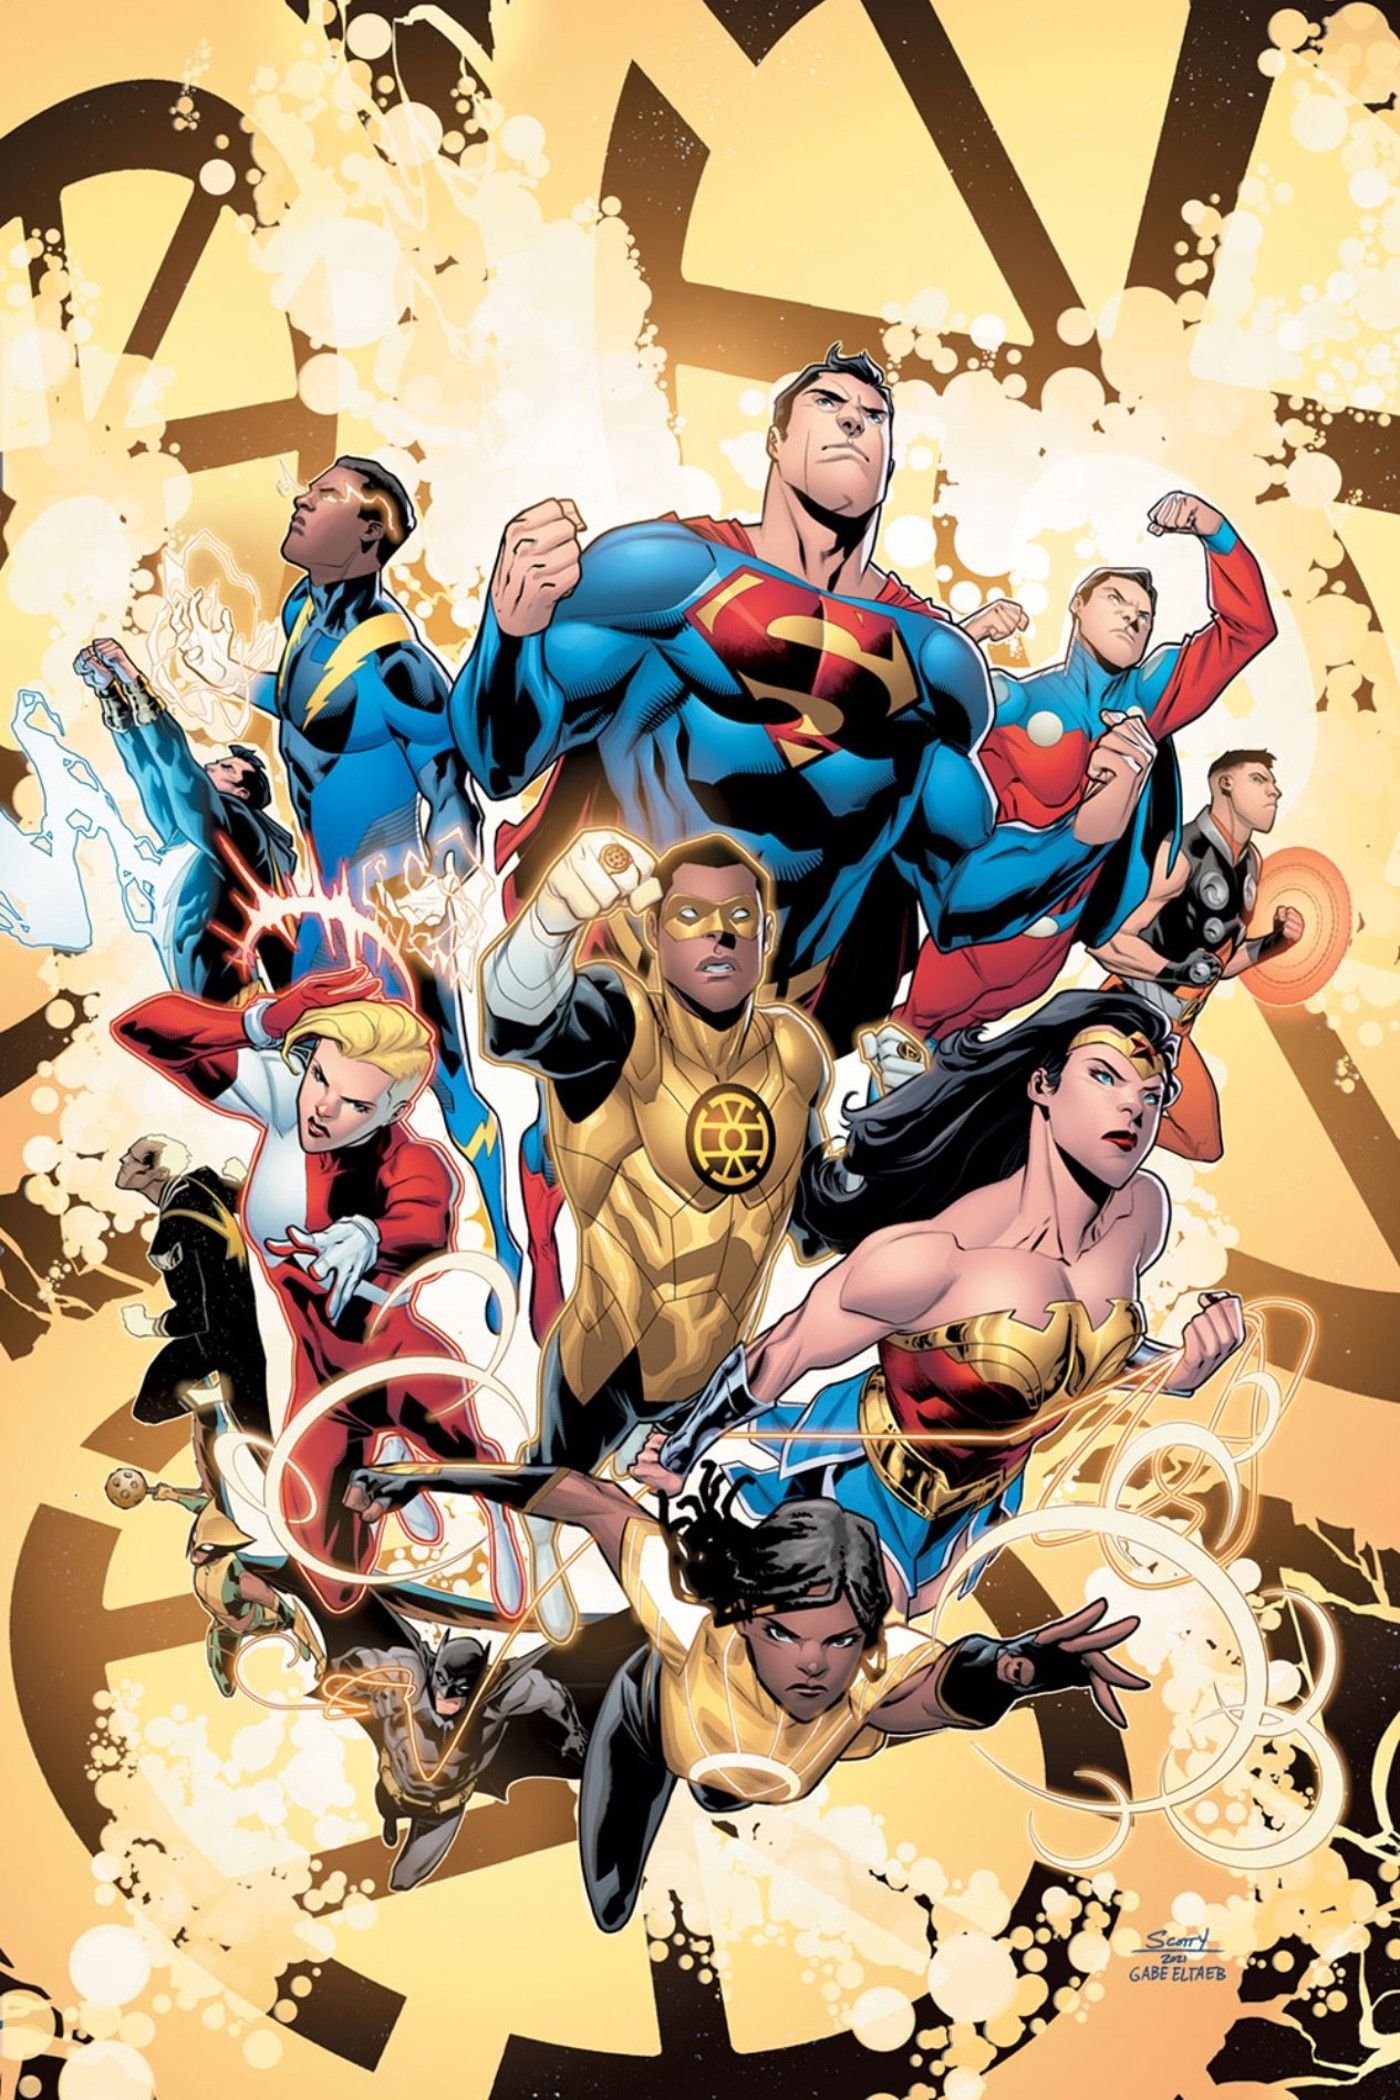 Justice League Vs Legion of Super-Heroes Cover